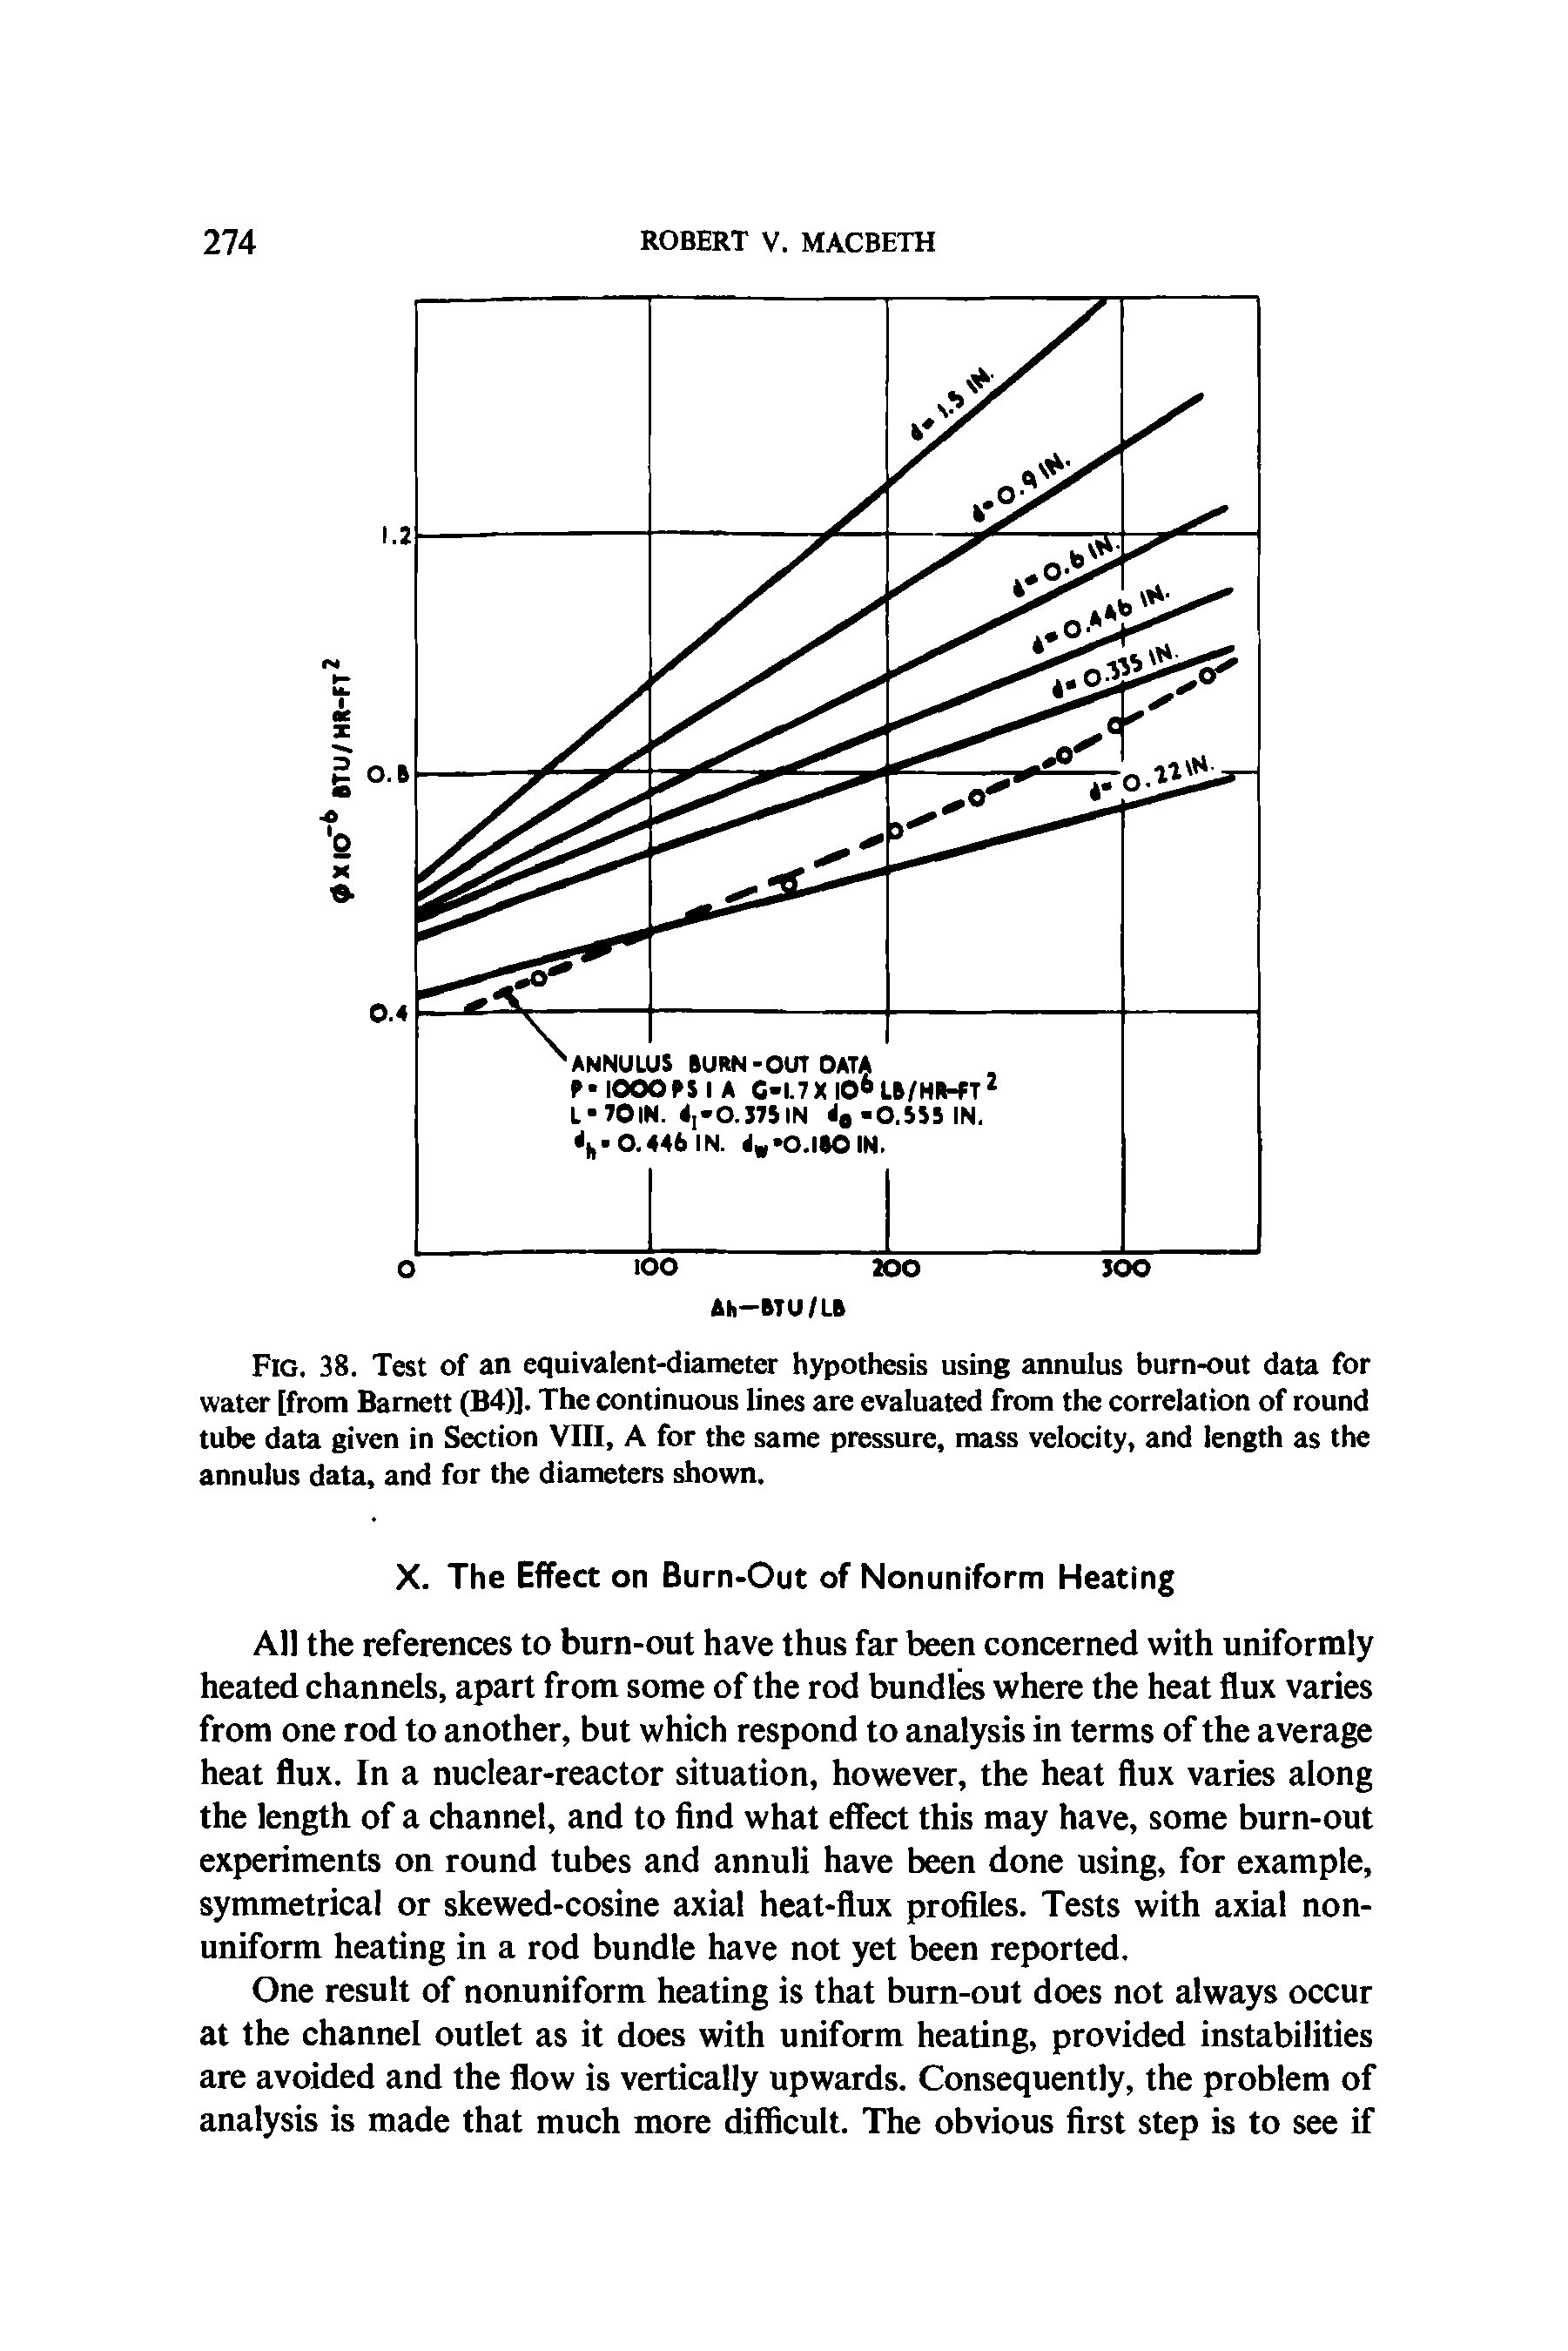 Fig. 38. Test of an equivalent-diameter hypothesis using annulus burn-out data for water [from Barnett (B4)]. The continuous lines are evaluated from the correlation of round tube data given in Section VIII, A for the same pressure, mass velocity, and length as the annulus data, and for the diameters shown.